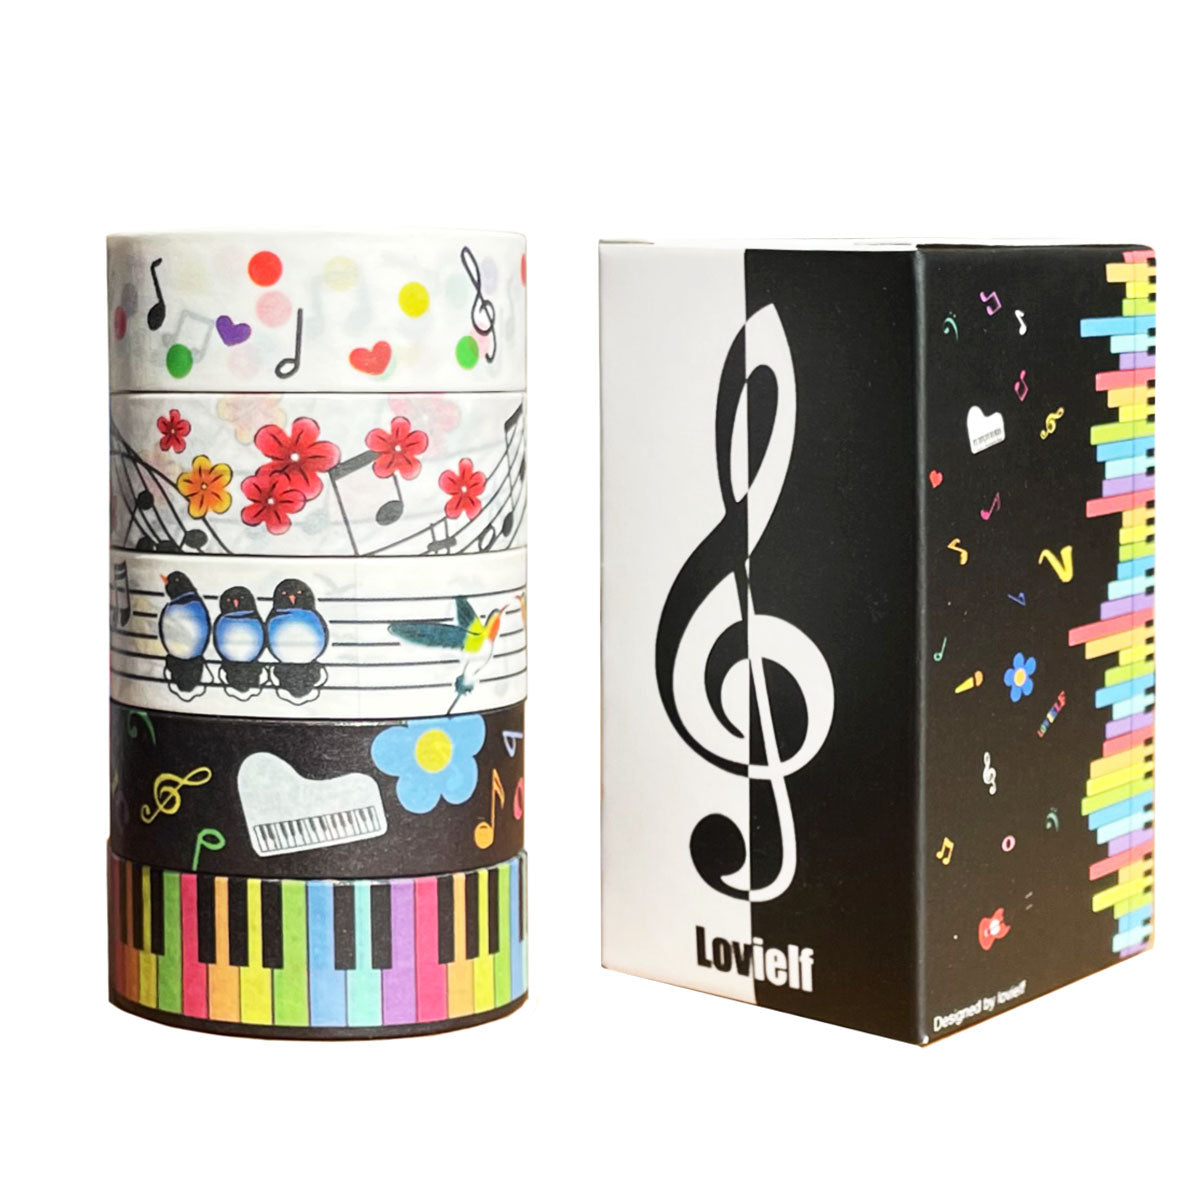 lovielf Washi Tape Set Music Note Piano Keyboard Black Colored Cute Dot Bird Flower Floral Washi Tape | 5 Rolls, 15mm for Craft Gift Wrapping, Planner, Journaling